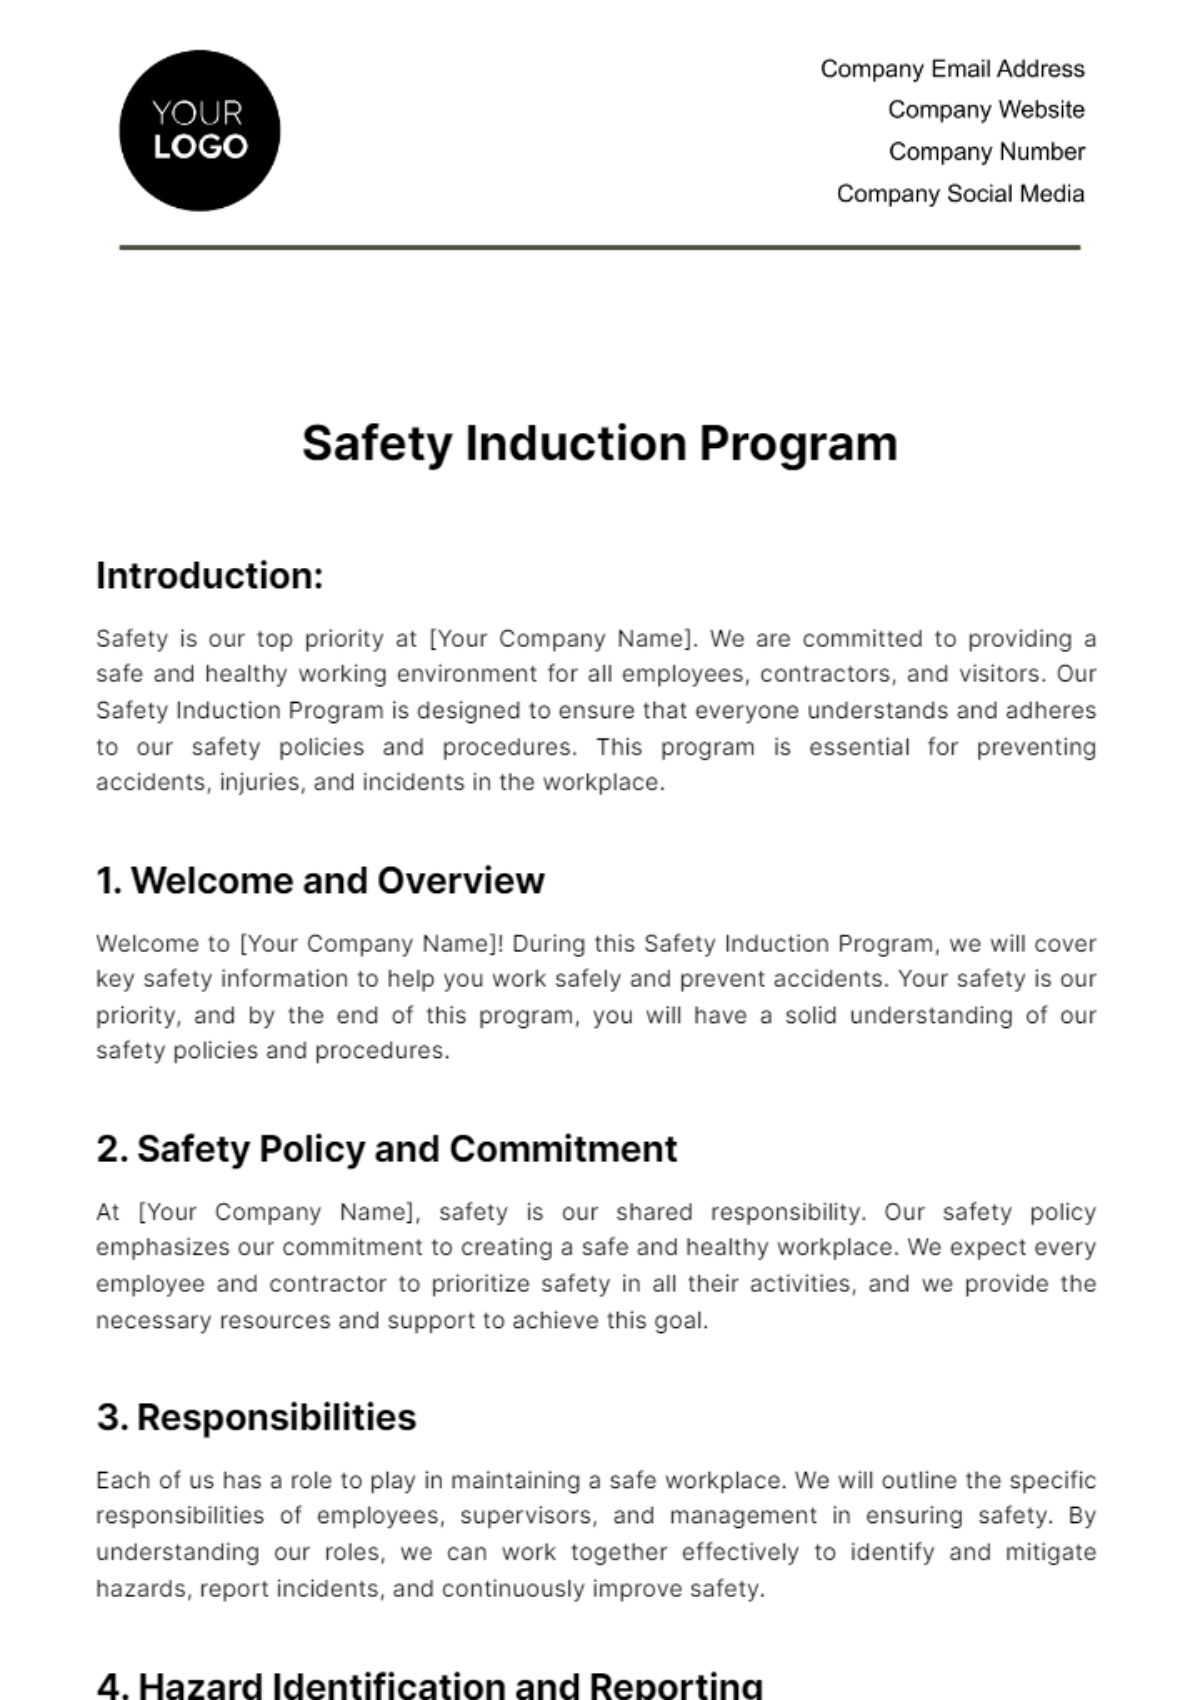 Safety Induction Program HR Template